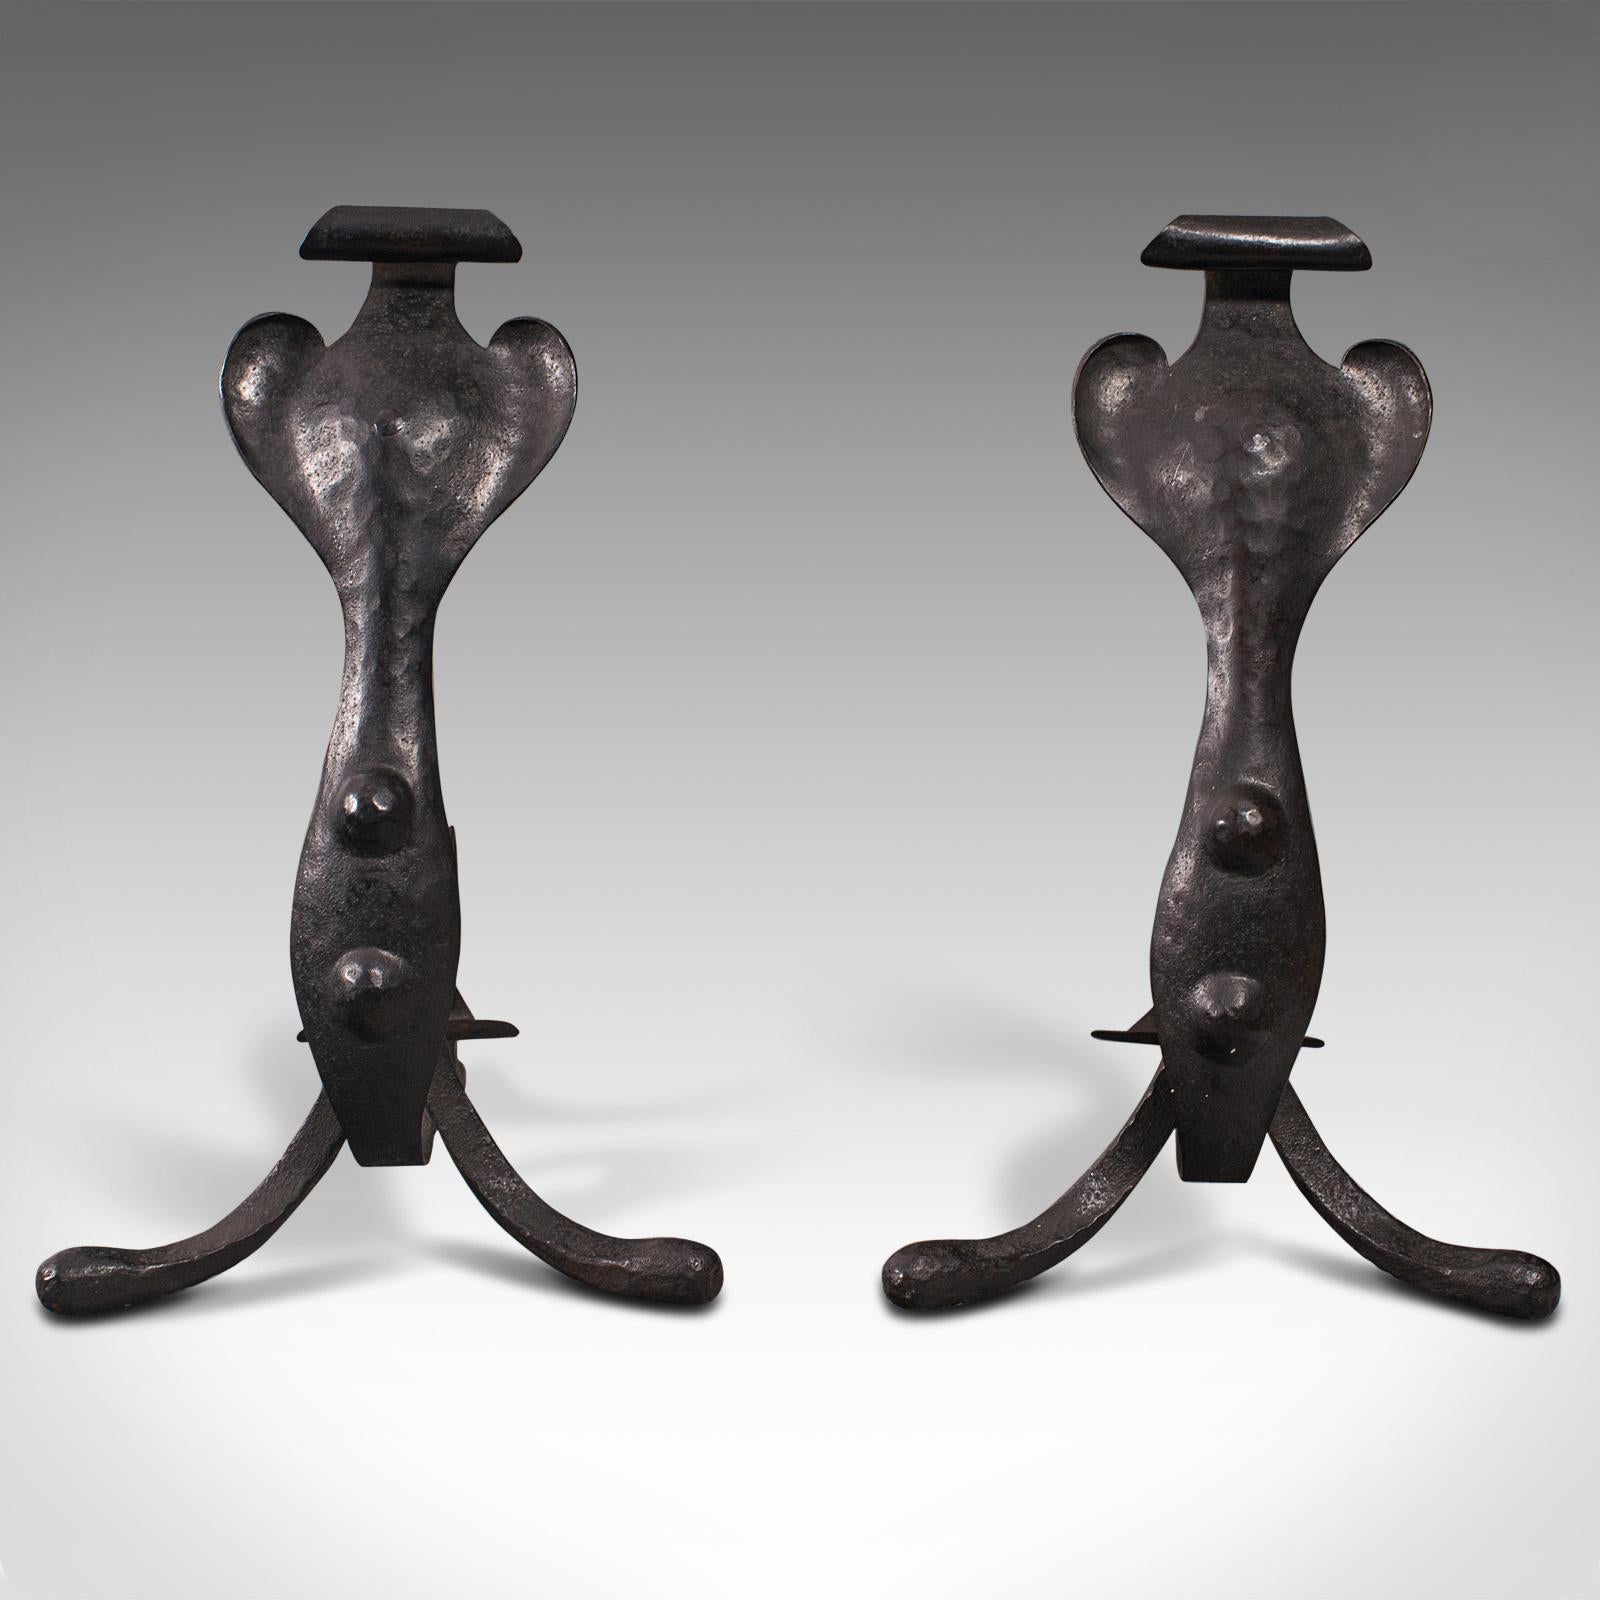 This is a pair of fireside tool rests. An English, wrought iron fire dog in Art Nouveau taste, dating to the late Victorian period, circa 1900.

Captivatingly expressive example of Art Nouveau for the fireplace
Displays a desirable aged patina